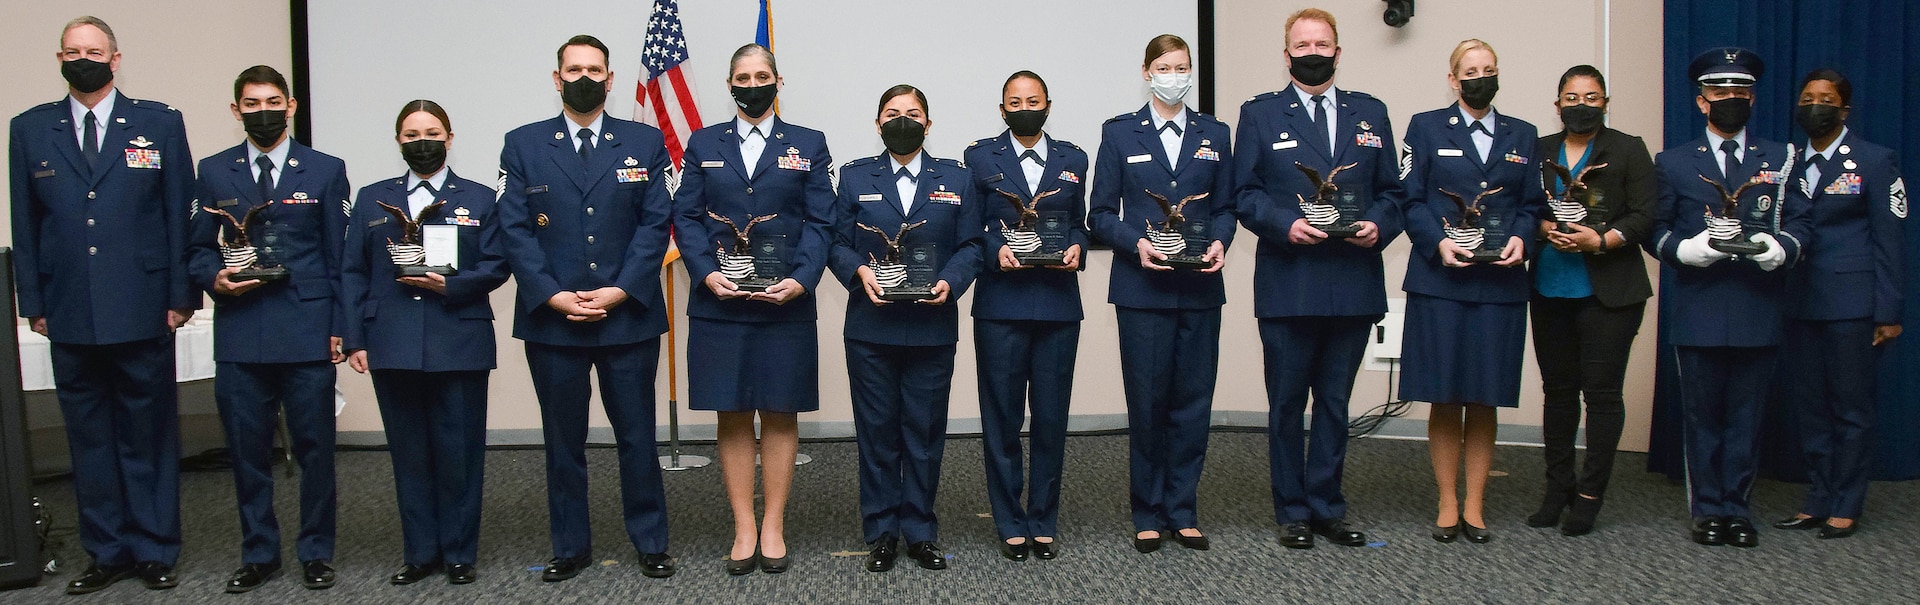 Col. Terry McClain, 433rd Airlift Wing commander, and Chief Master Sgt. Takesha Williams, 433rd AW command chief, stand with the annual wing award winners after the awards ceremony Feb. 5, 2022, at Joint Base San Antonio-Lackland, Texas. (U.S. Air Force photo by Staff Sgt. Monet Villacorte)